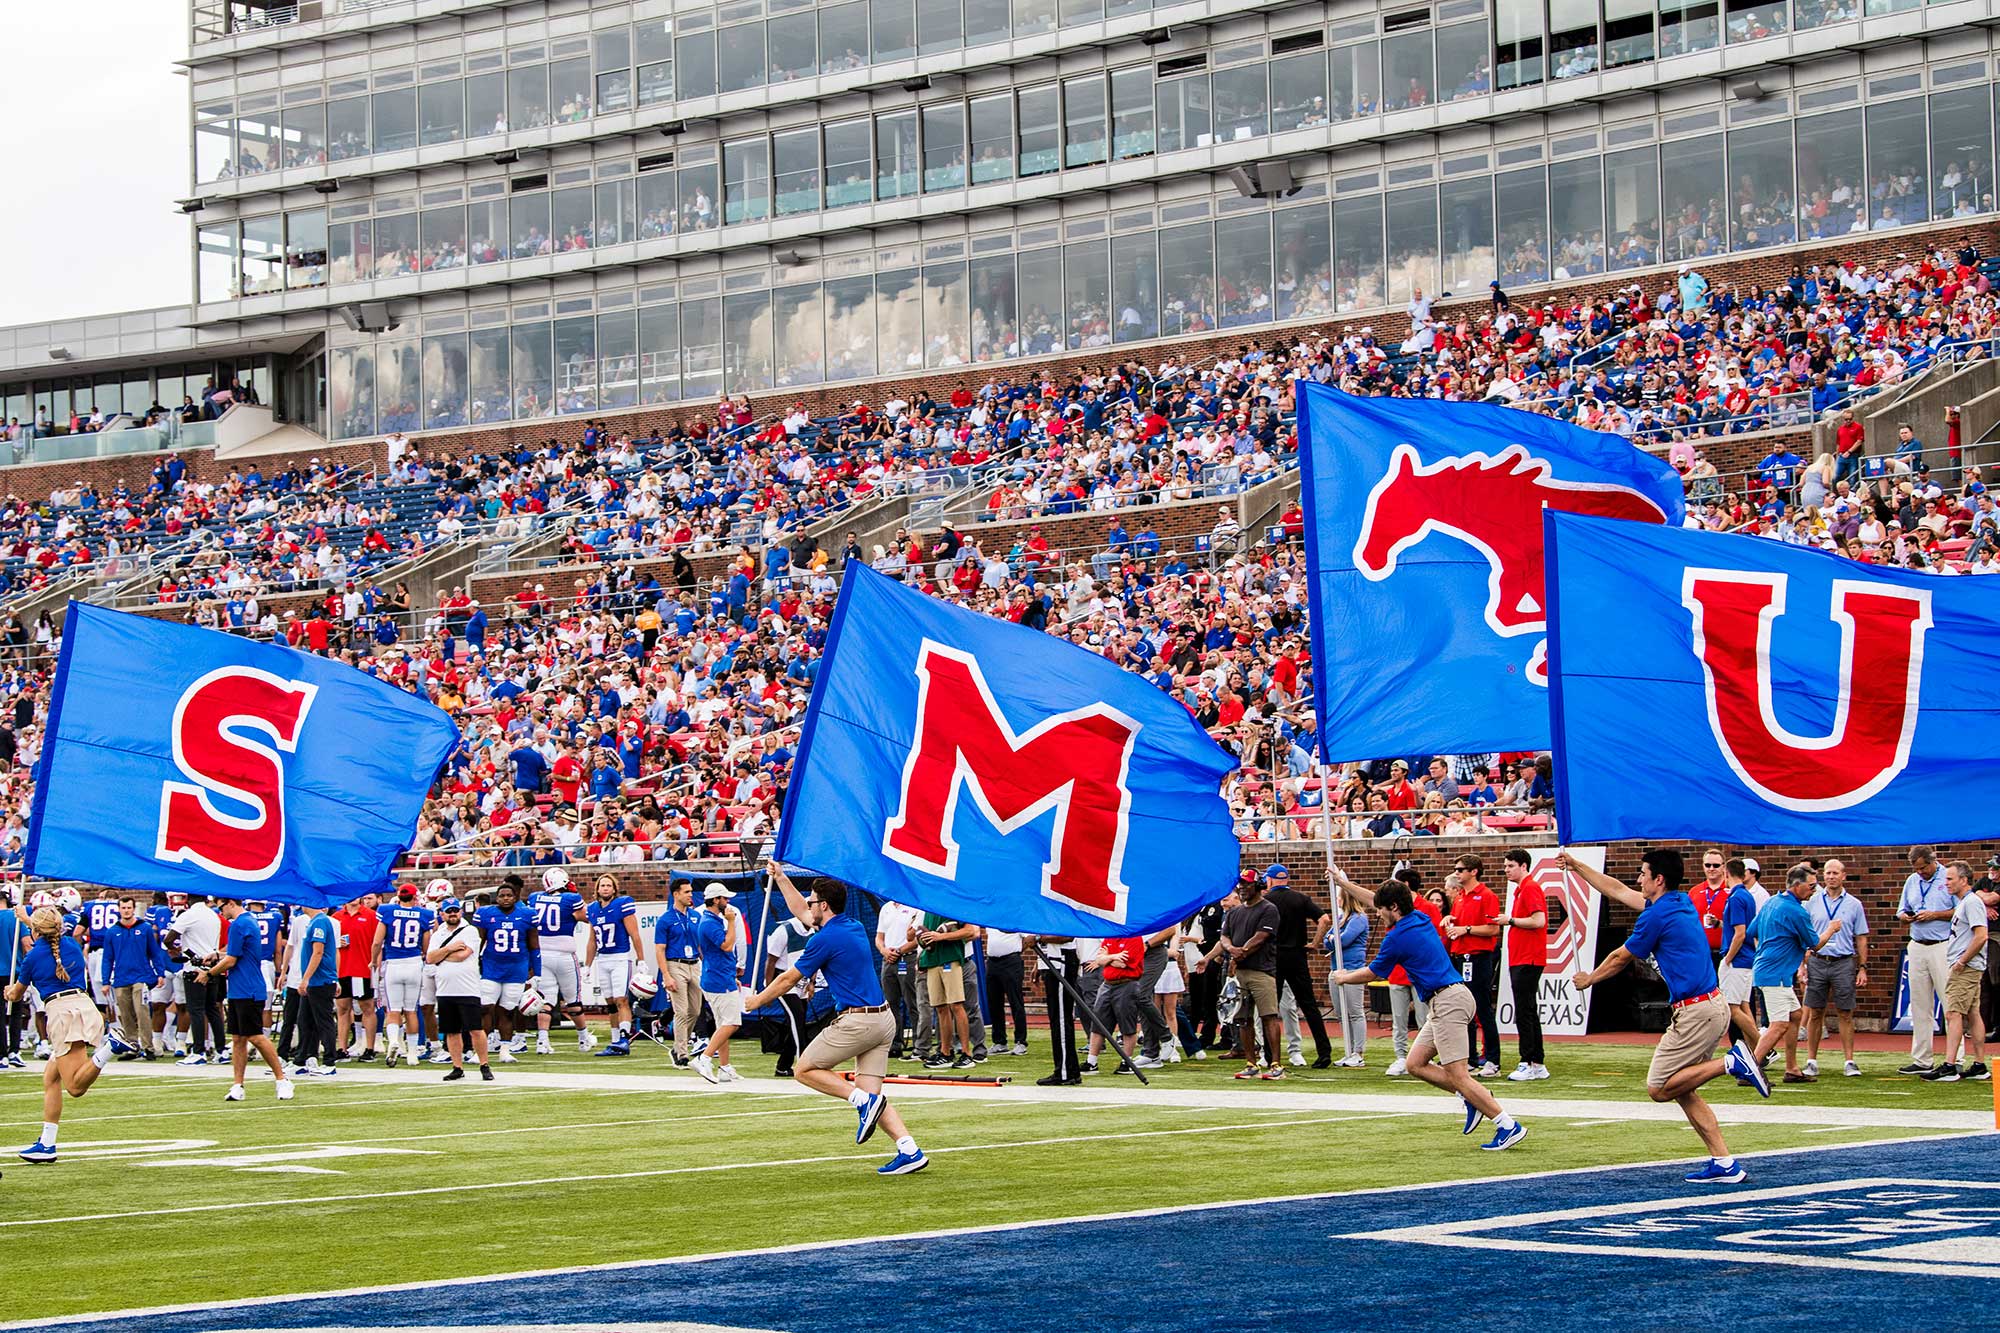 People running with SMU flags